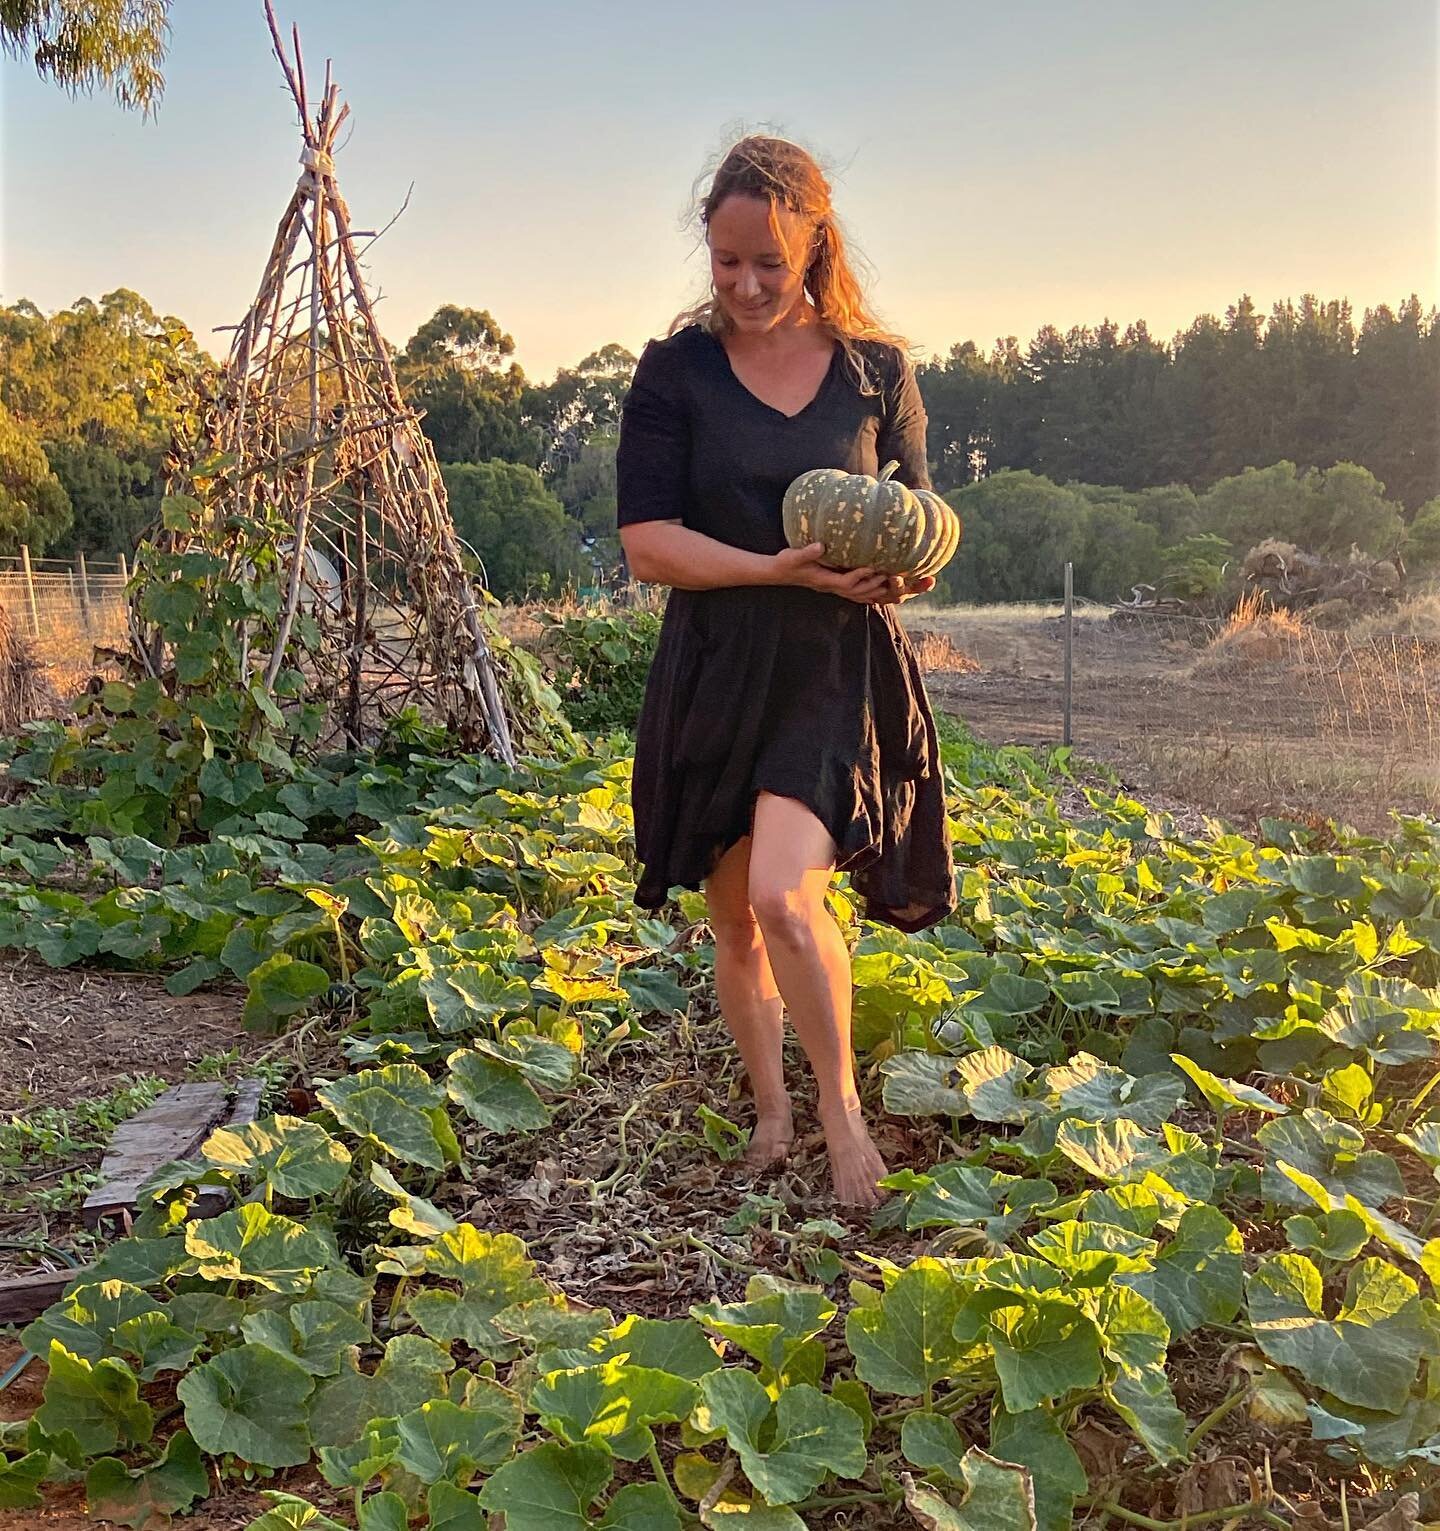 Golden evenings, and the start of the pumpkin harvest 🧡☀️